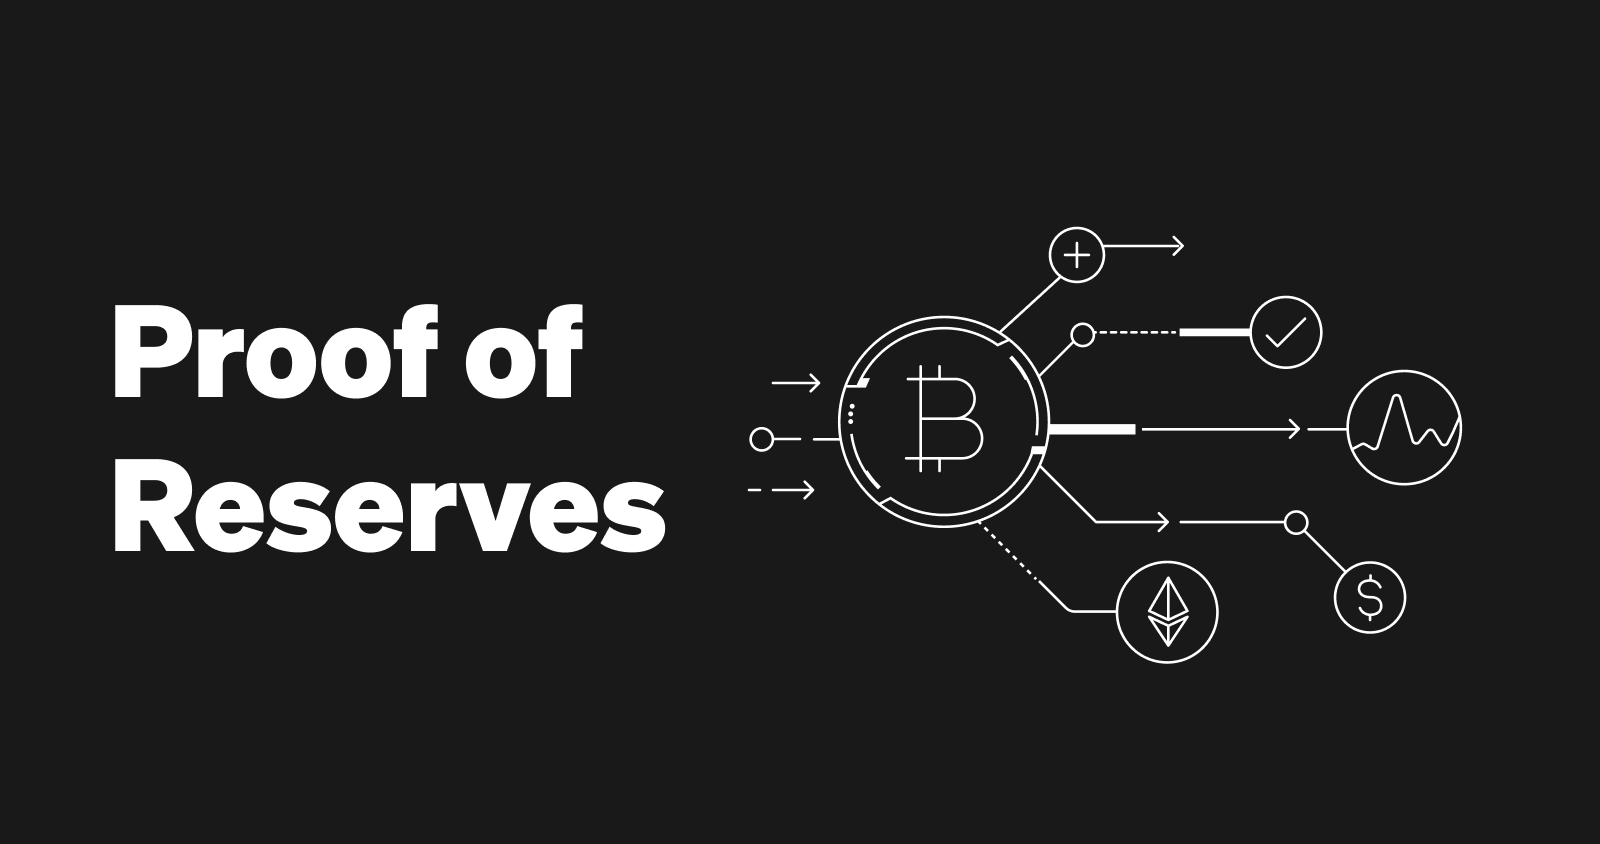 Is Proof of Reserves the future of audits?